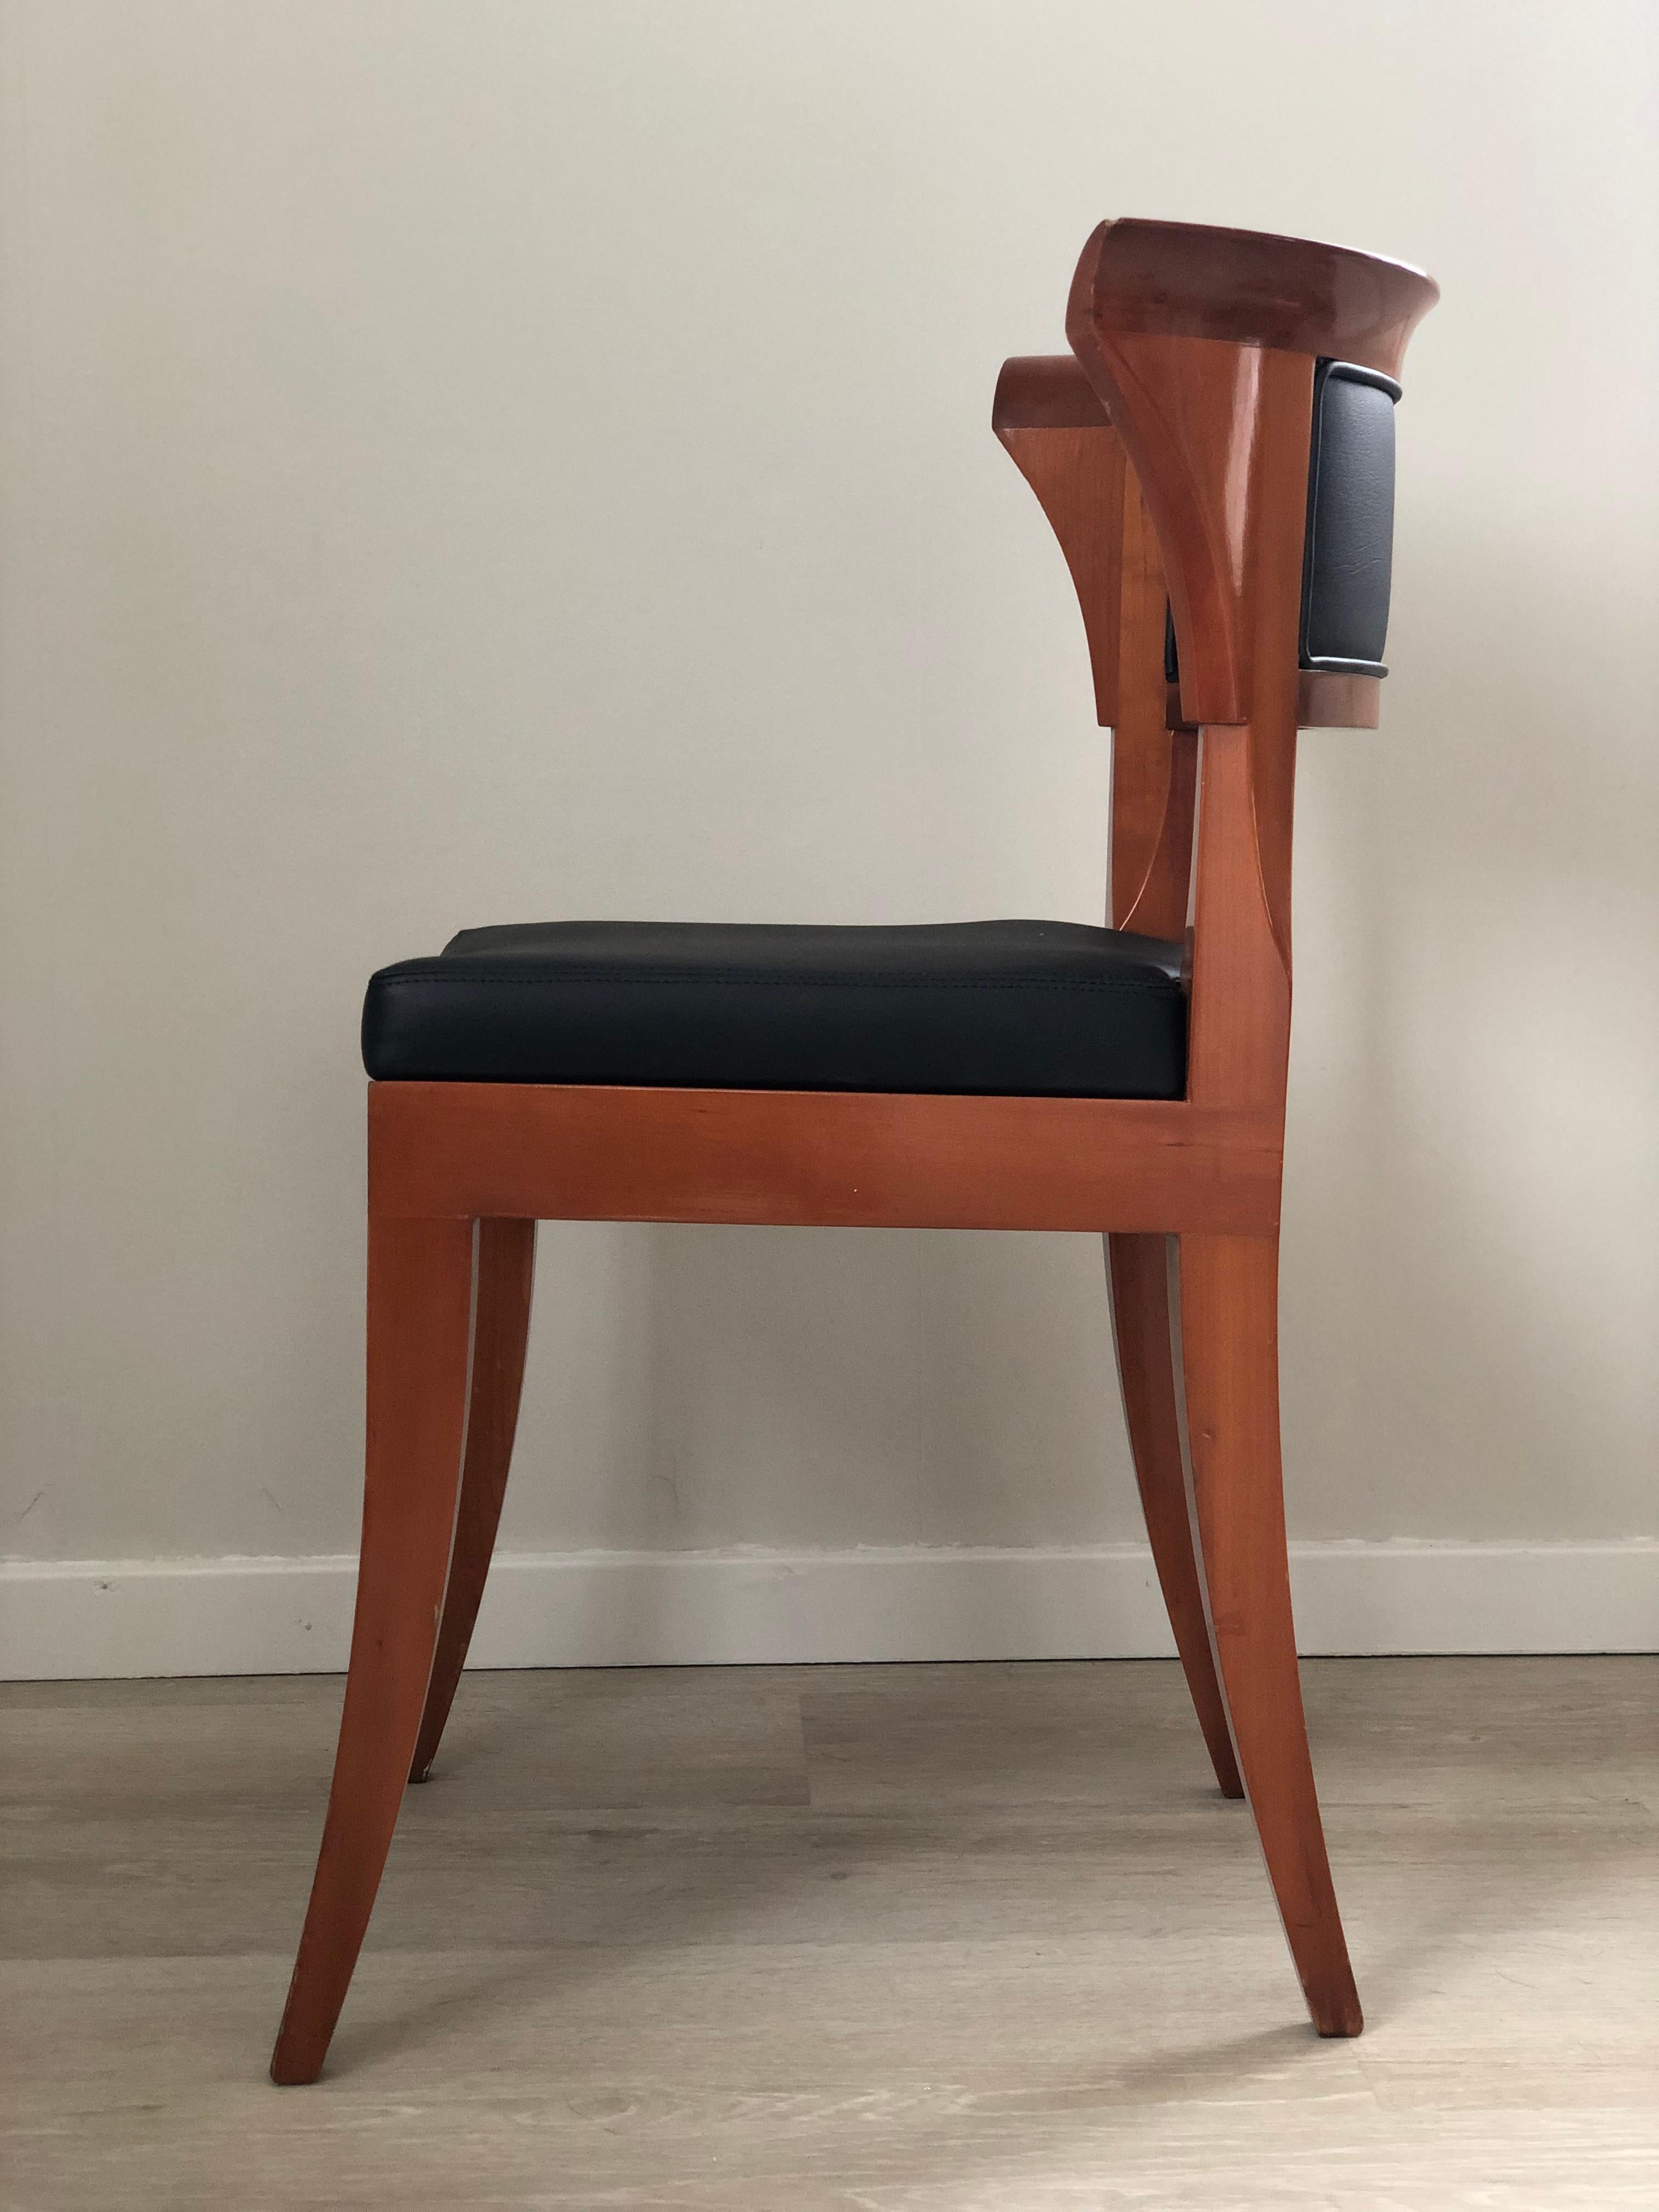 A Pair of 4 Giorgetti Cherry Wood Dining Chairs Model Sella Media by Leon Krier  For Sale 1